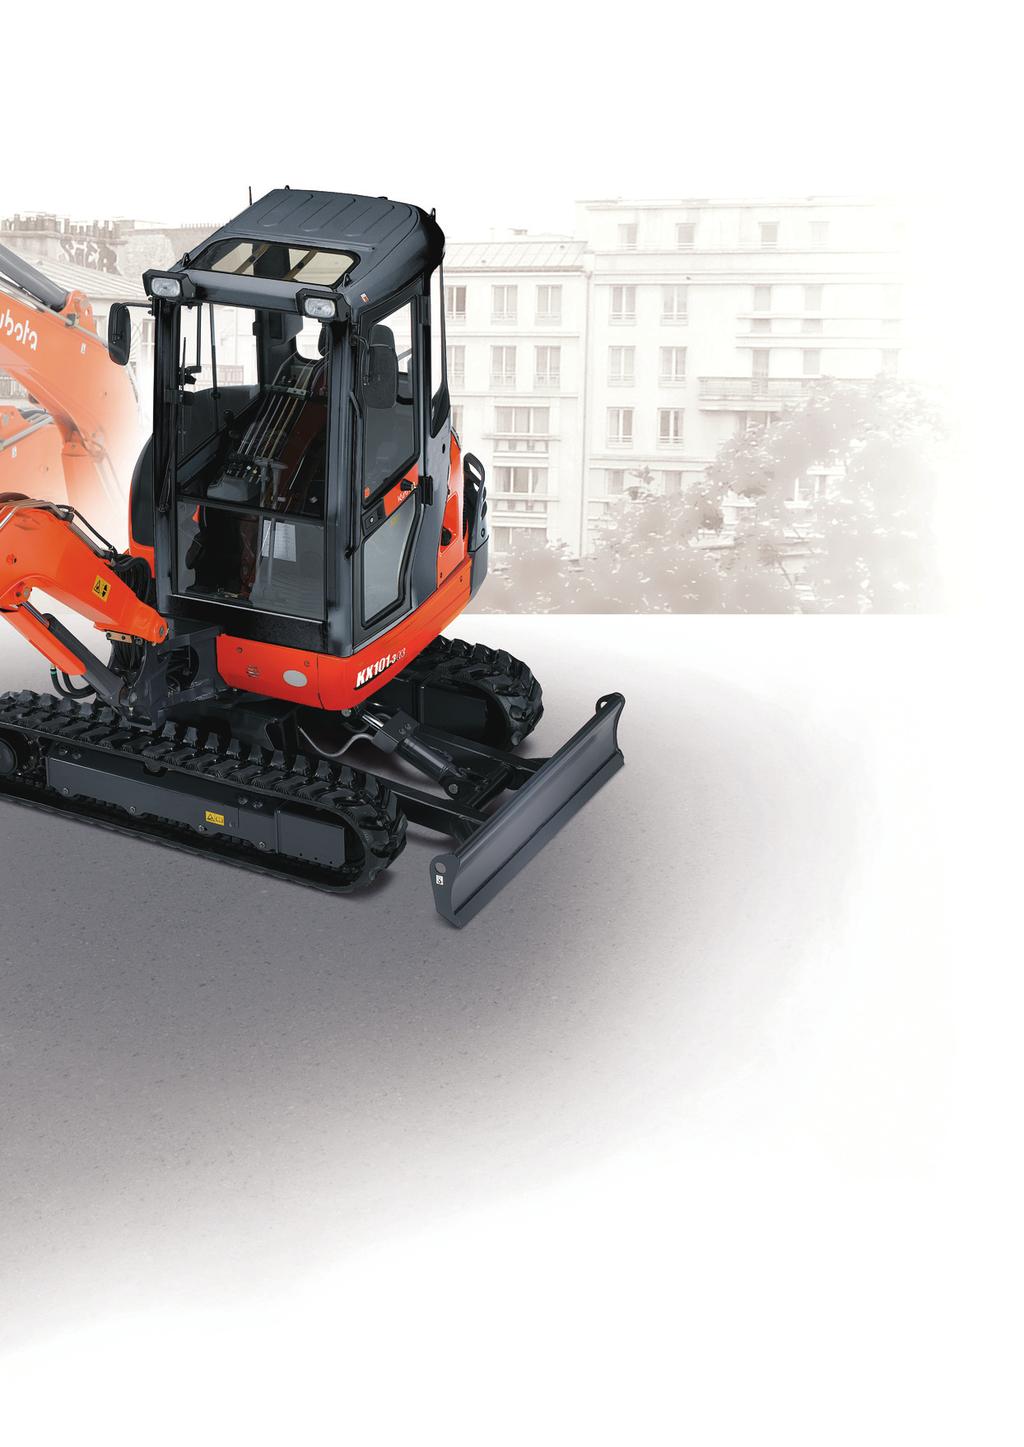 KUBOTA MINI EXCAVATOR Adjustable maximum oil flow on auxiliary circuit The maximum oil flow rate of the auxiliary circuit can be changed/adjusted by simply pushing a switch there s no need for